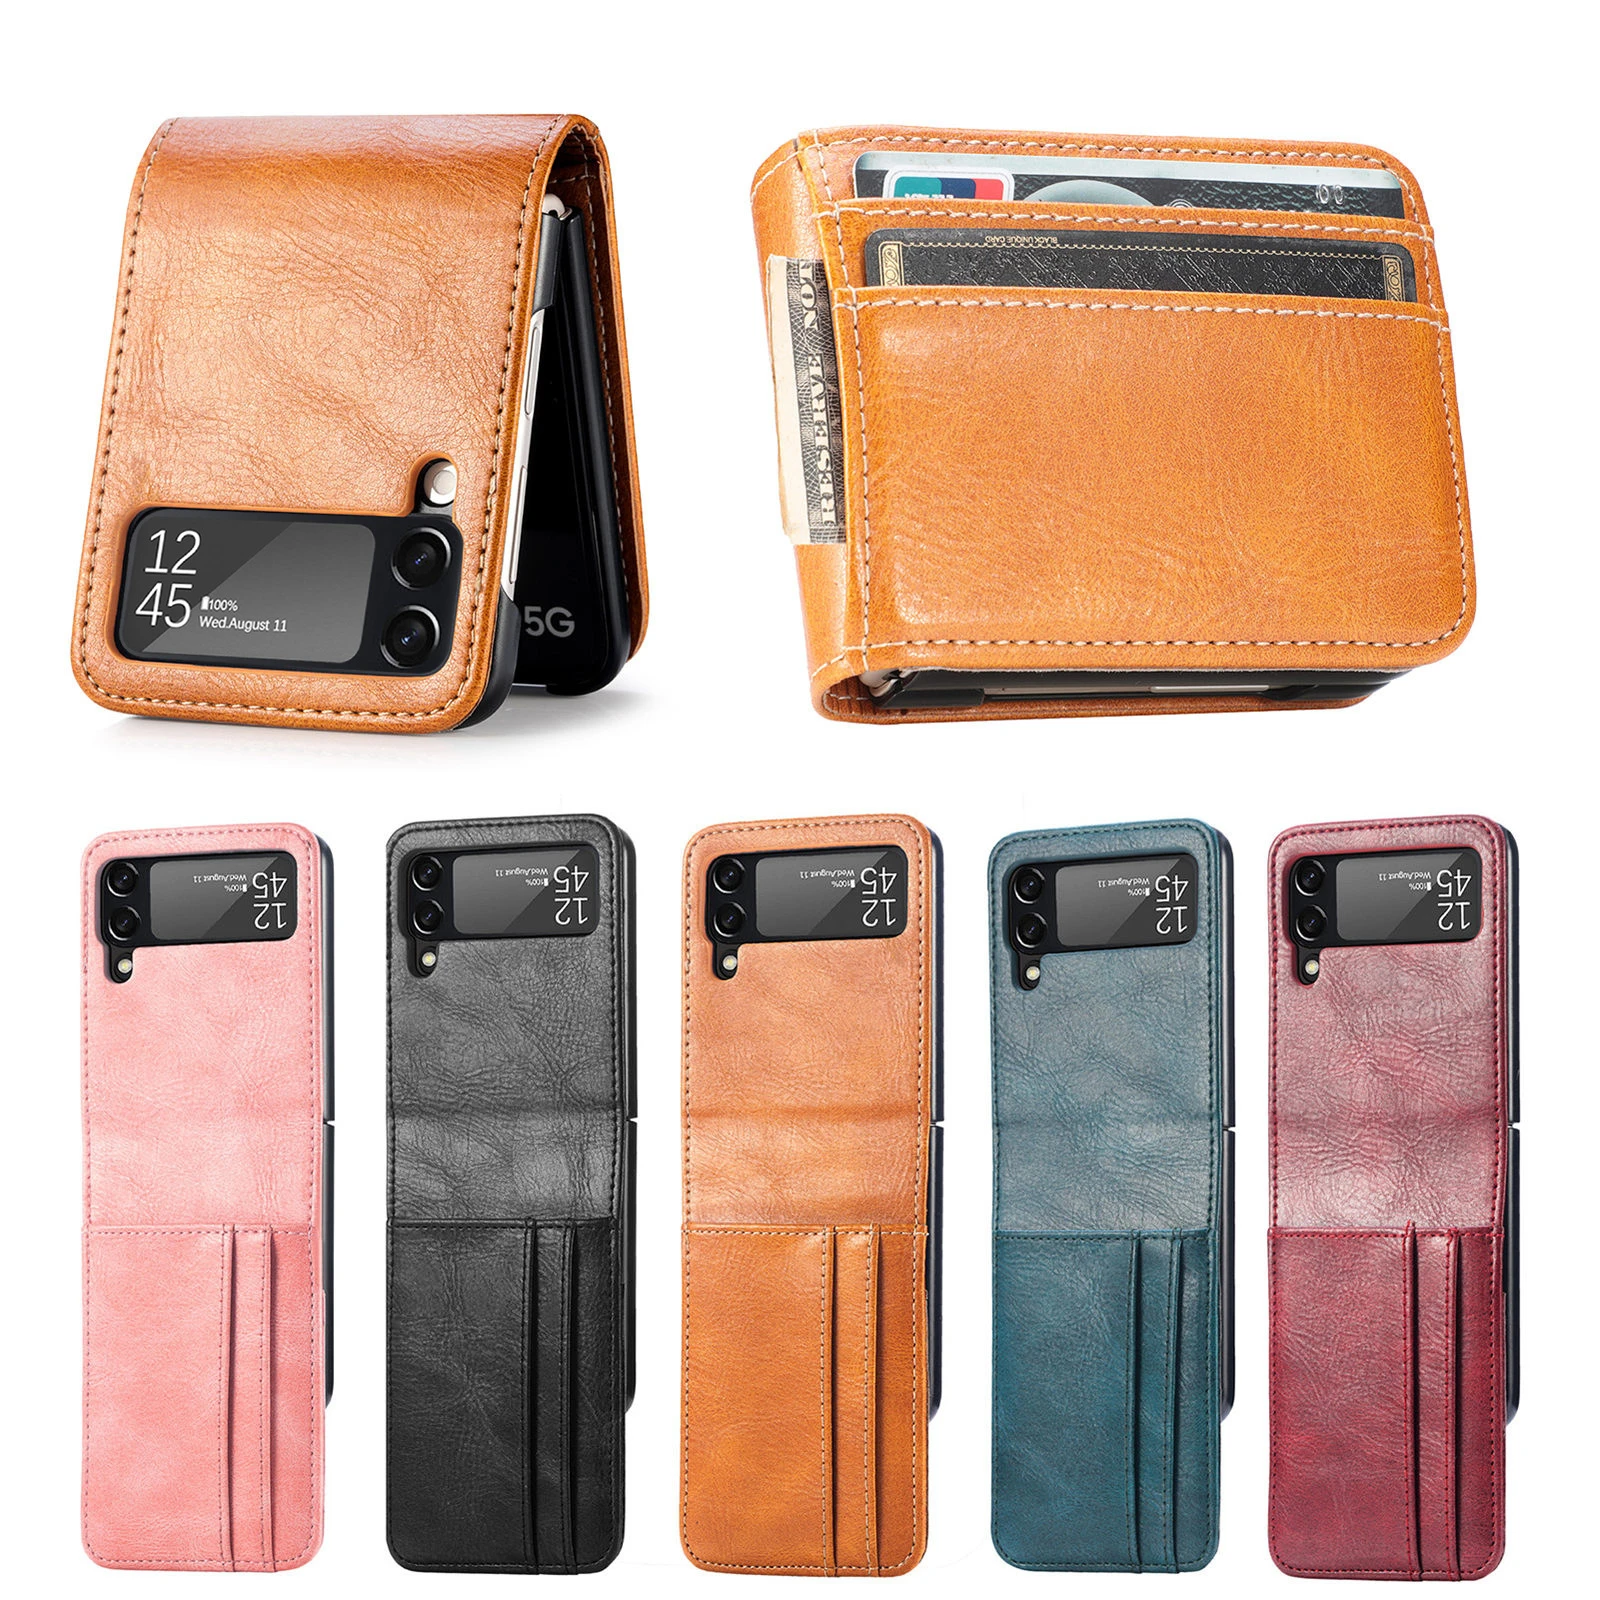 Leather Card Slot Phone Case for Samsung Z Flip 3 Soft Leather Protective Cover For Galaxy Z Flip3 5G SM-F711B Ultra Slim Cover samsung galaxy z flip3 case